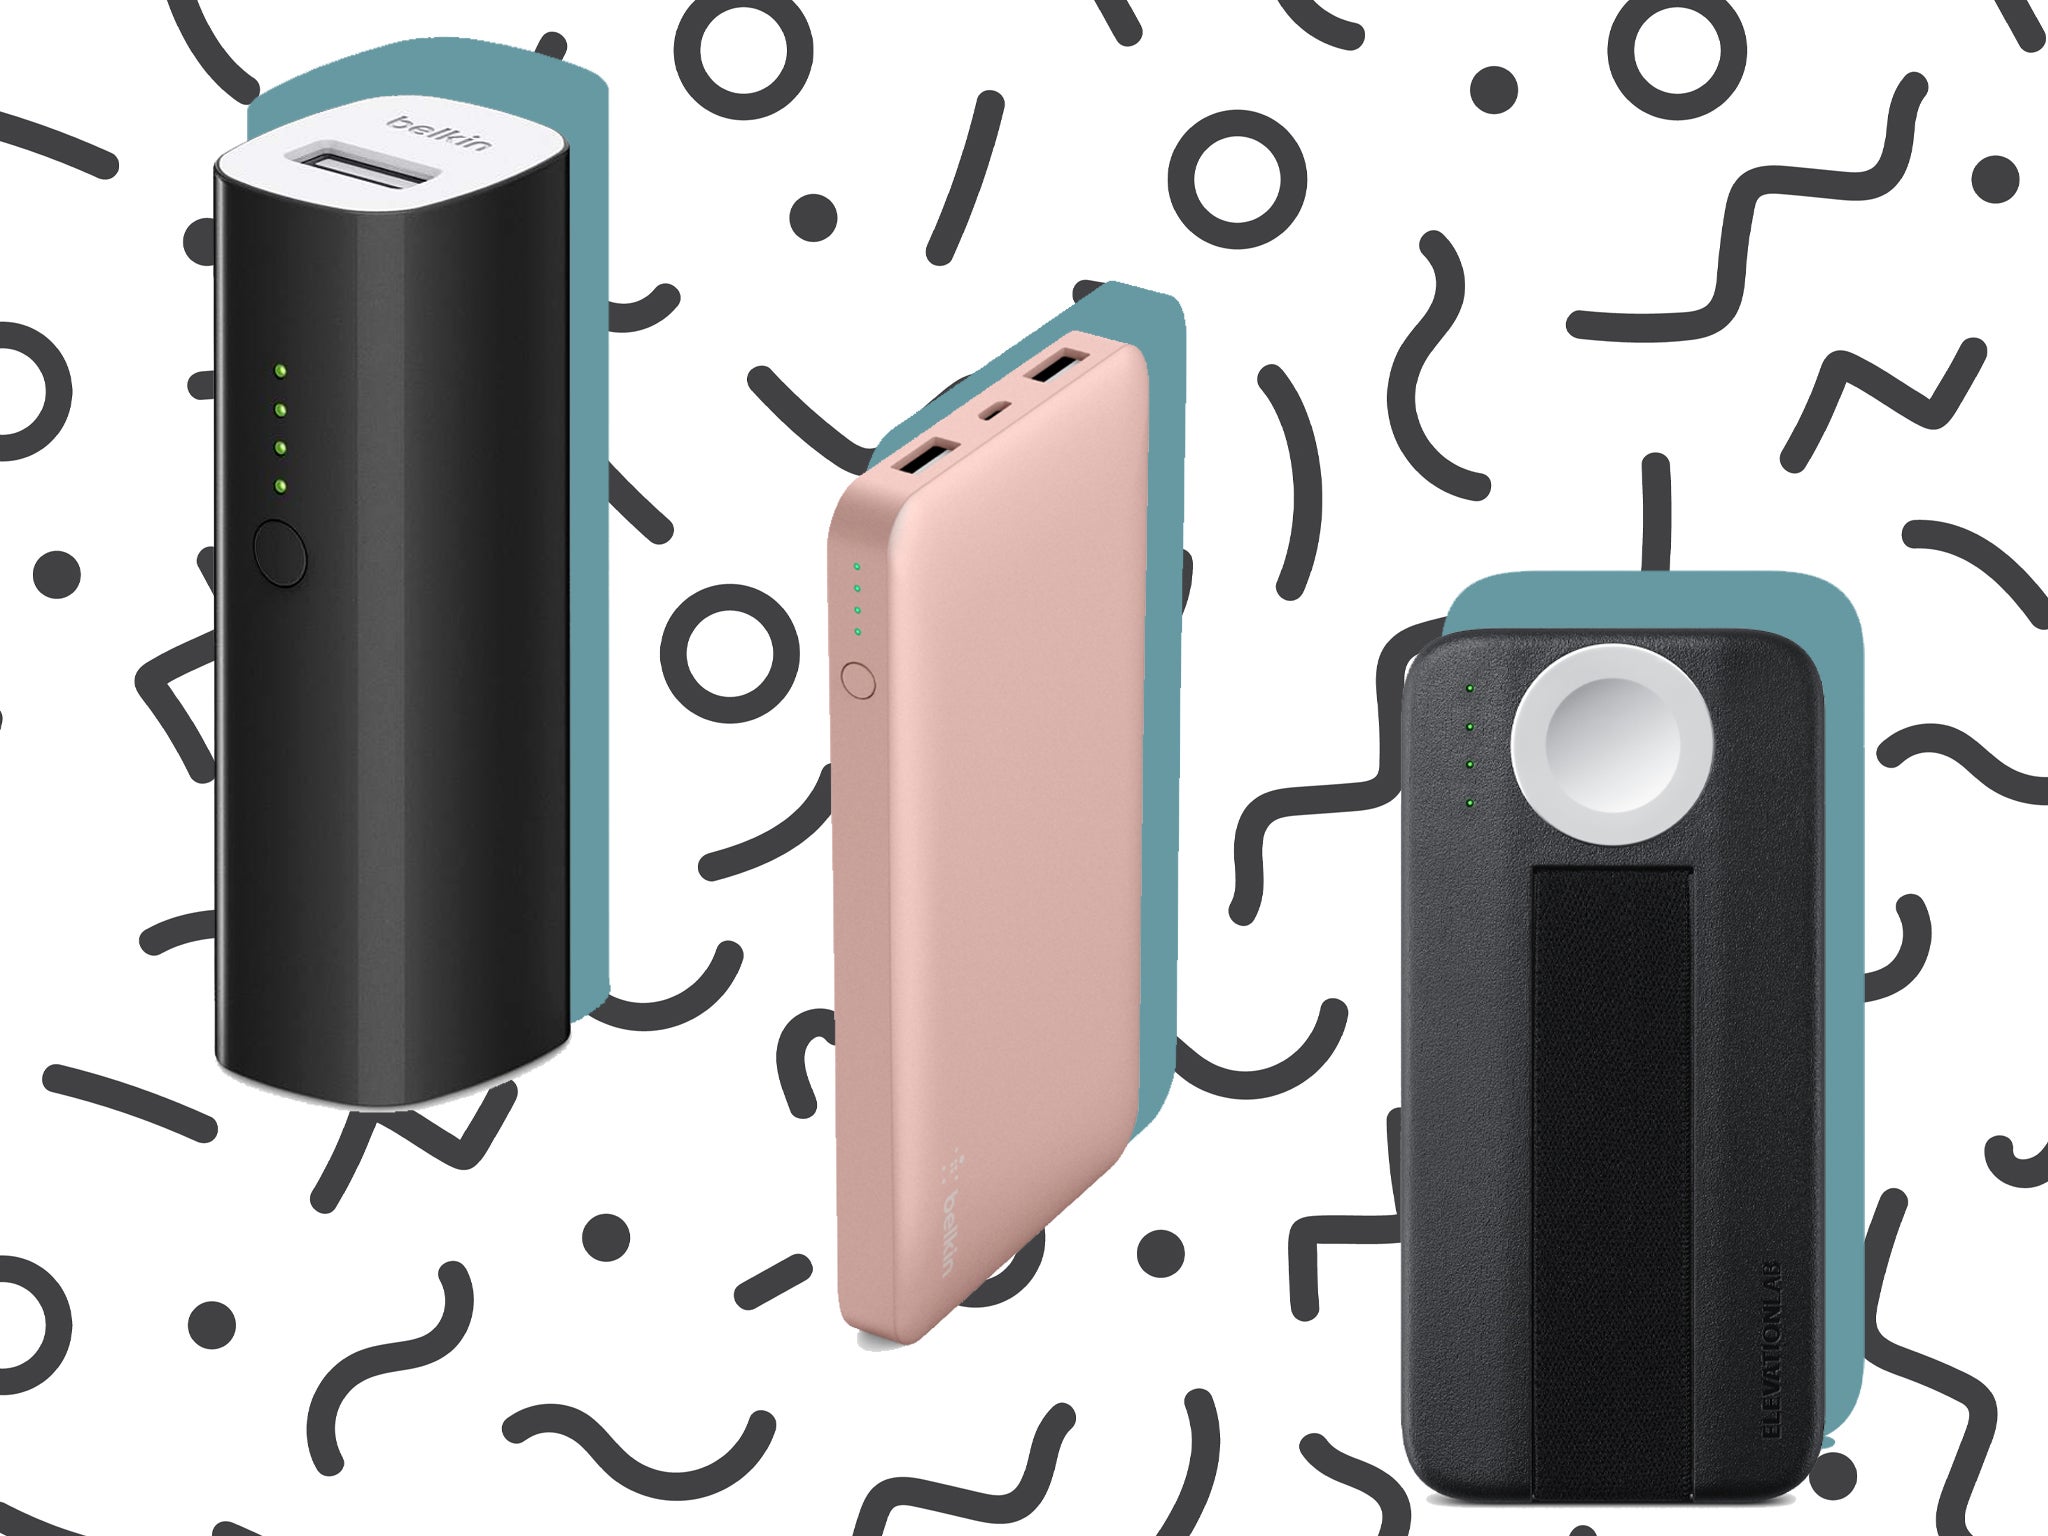 Best portable charger 2020: Top up your